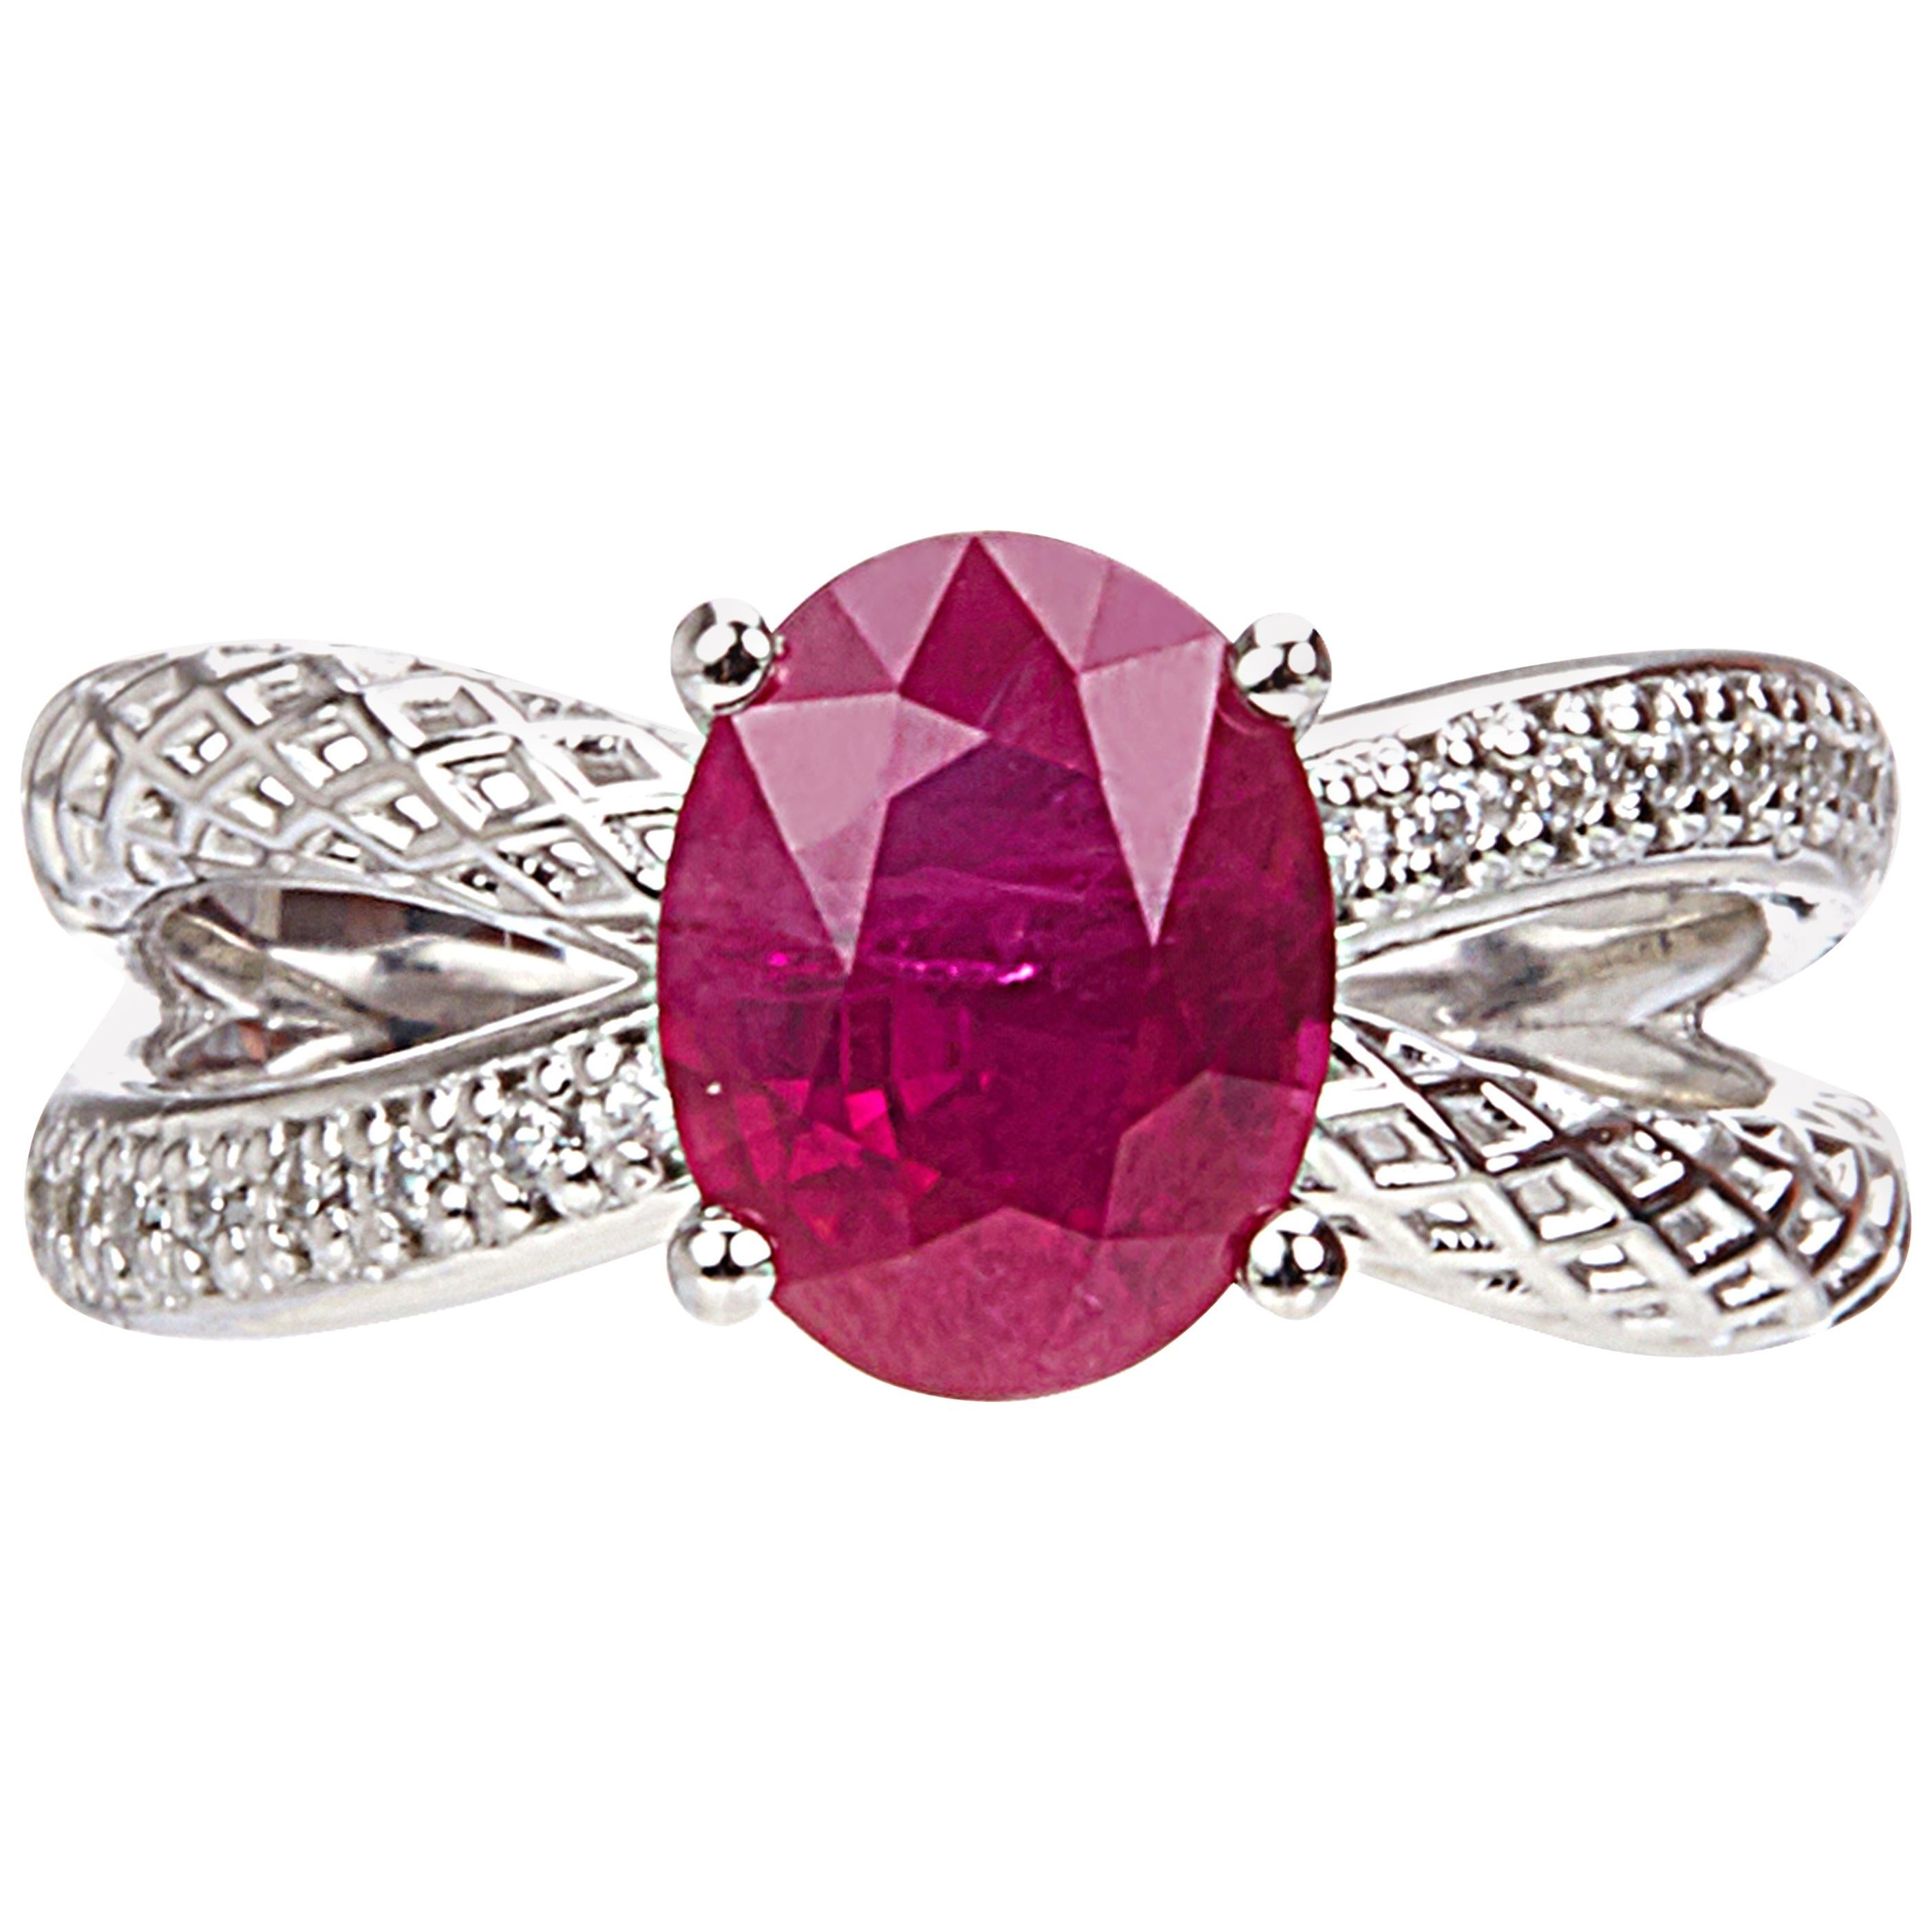 Yemyungji Burma Ruby Oval Cut 2.37ct Diamond 18 Karat White Gold Solitaire Ring For Sale